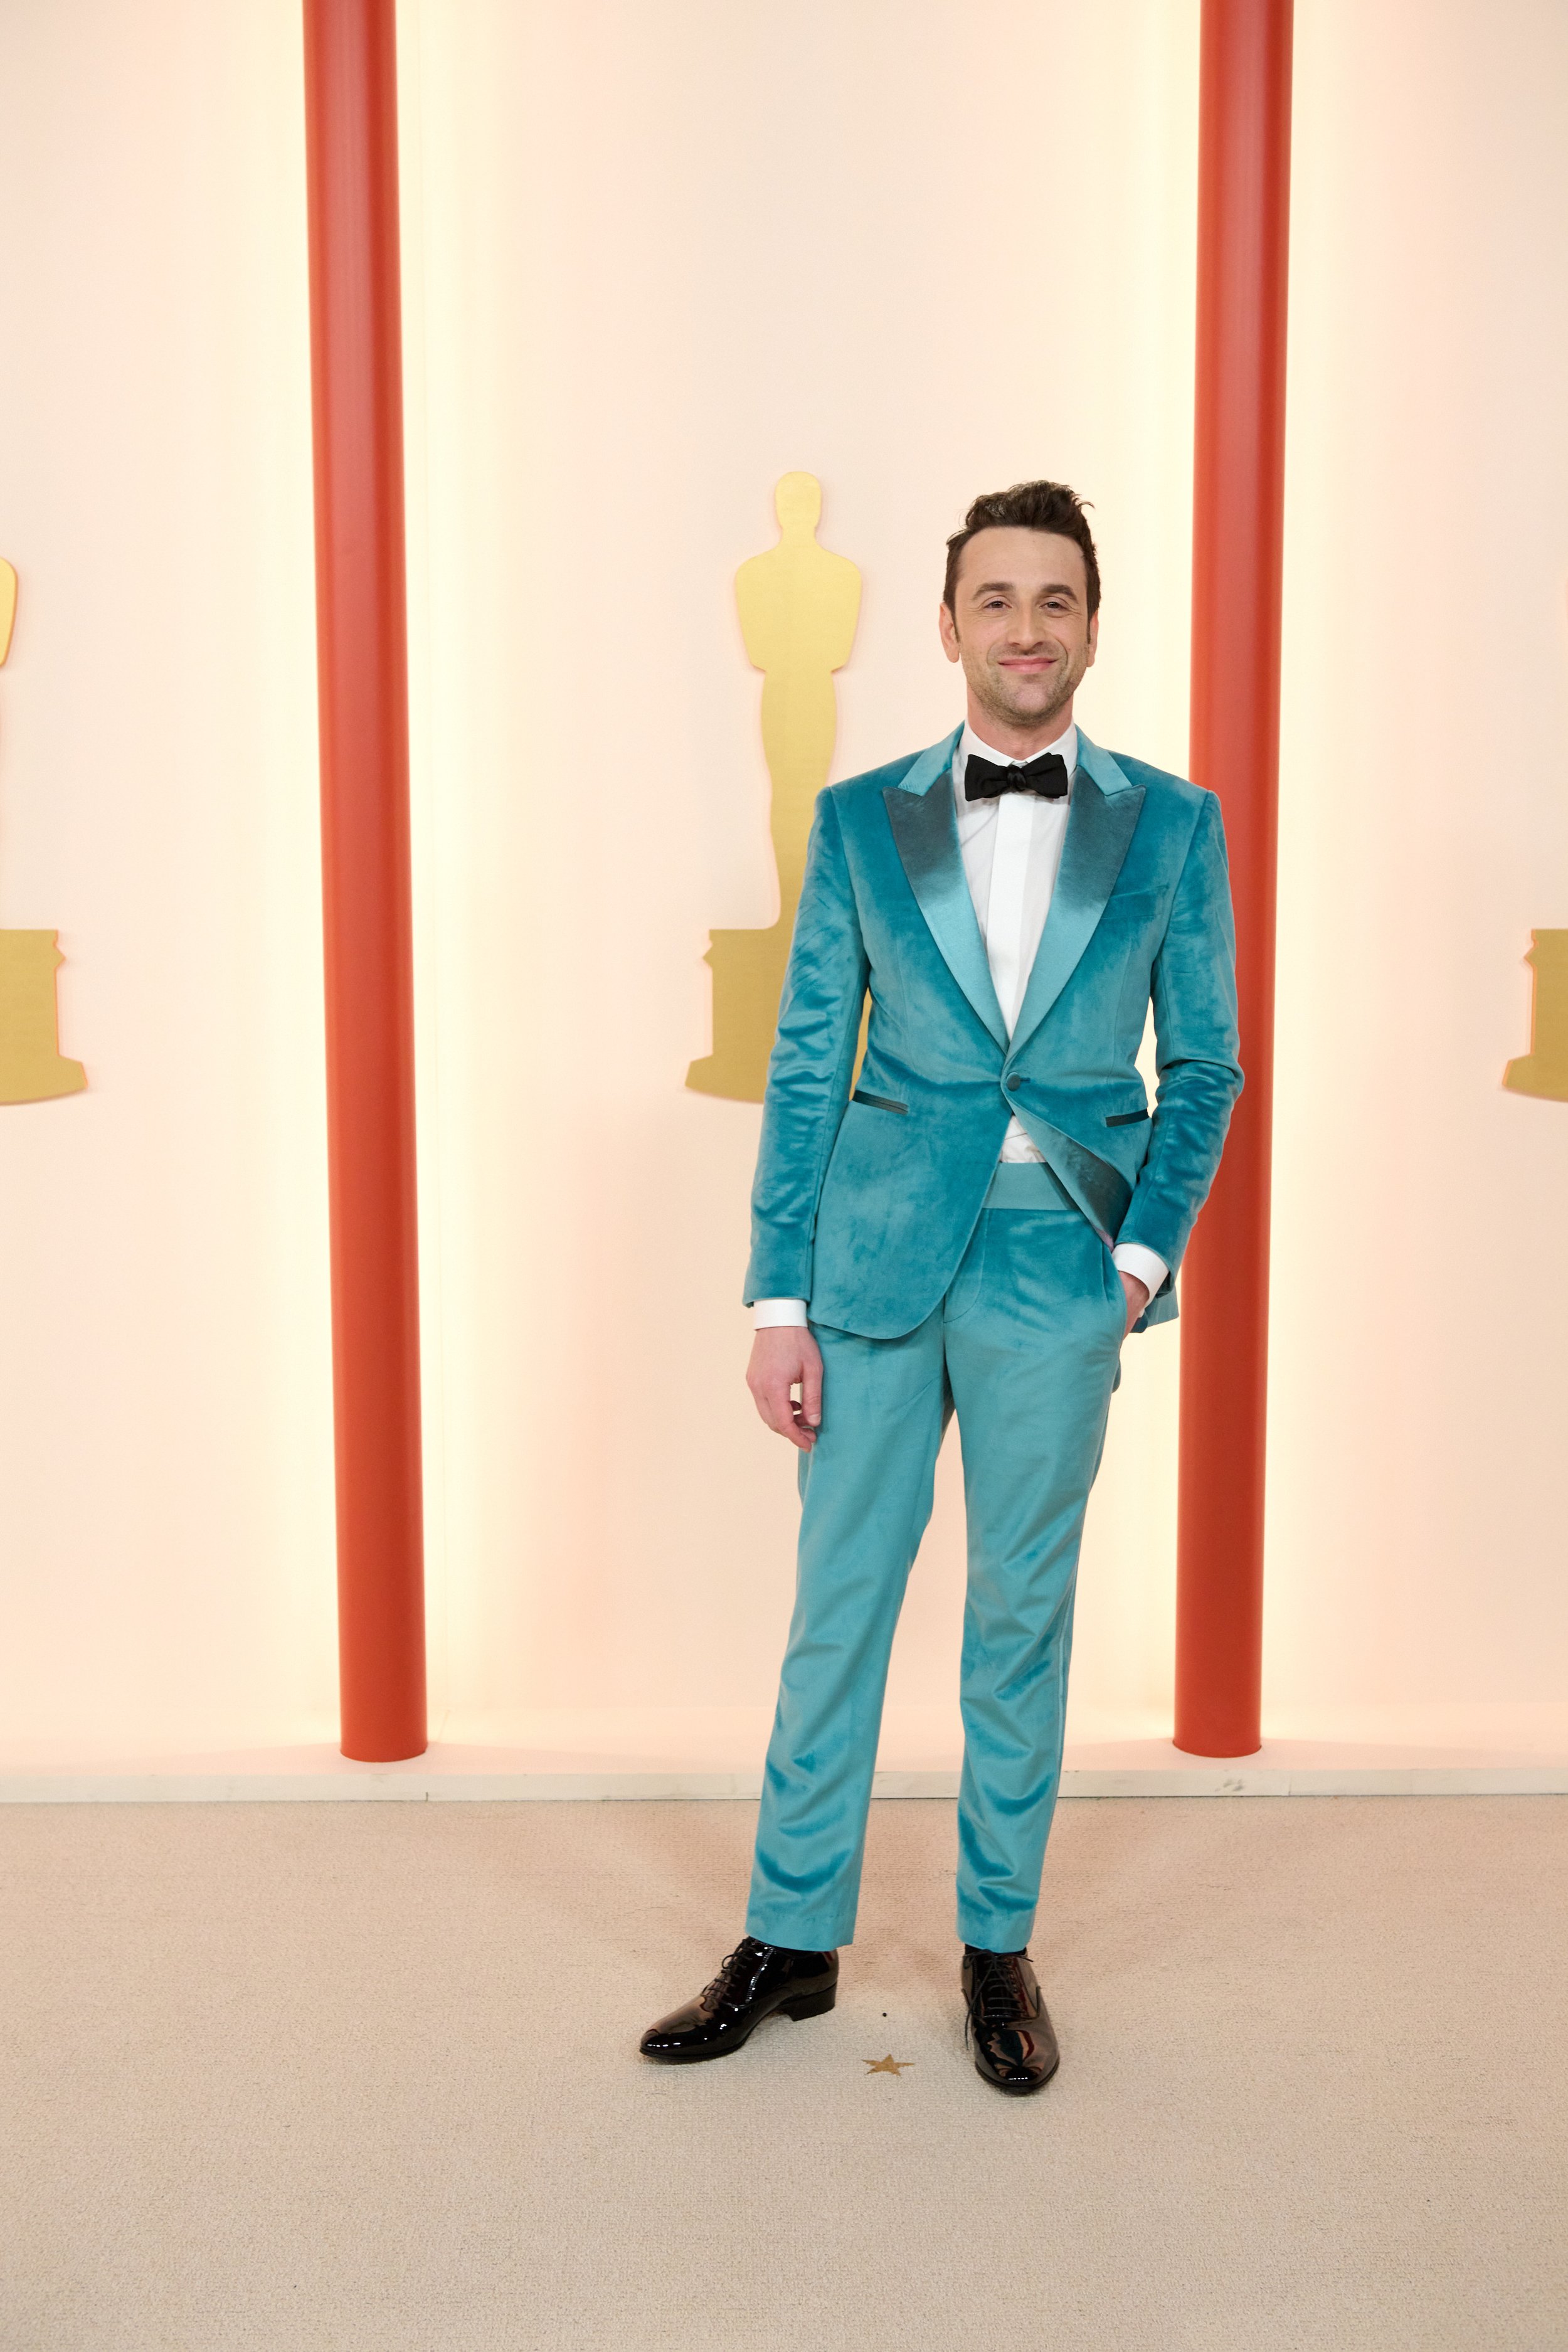 Oscar® nominee Justin Hurwitz arrives on the red carpet of the 95th Oscars